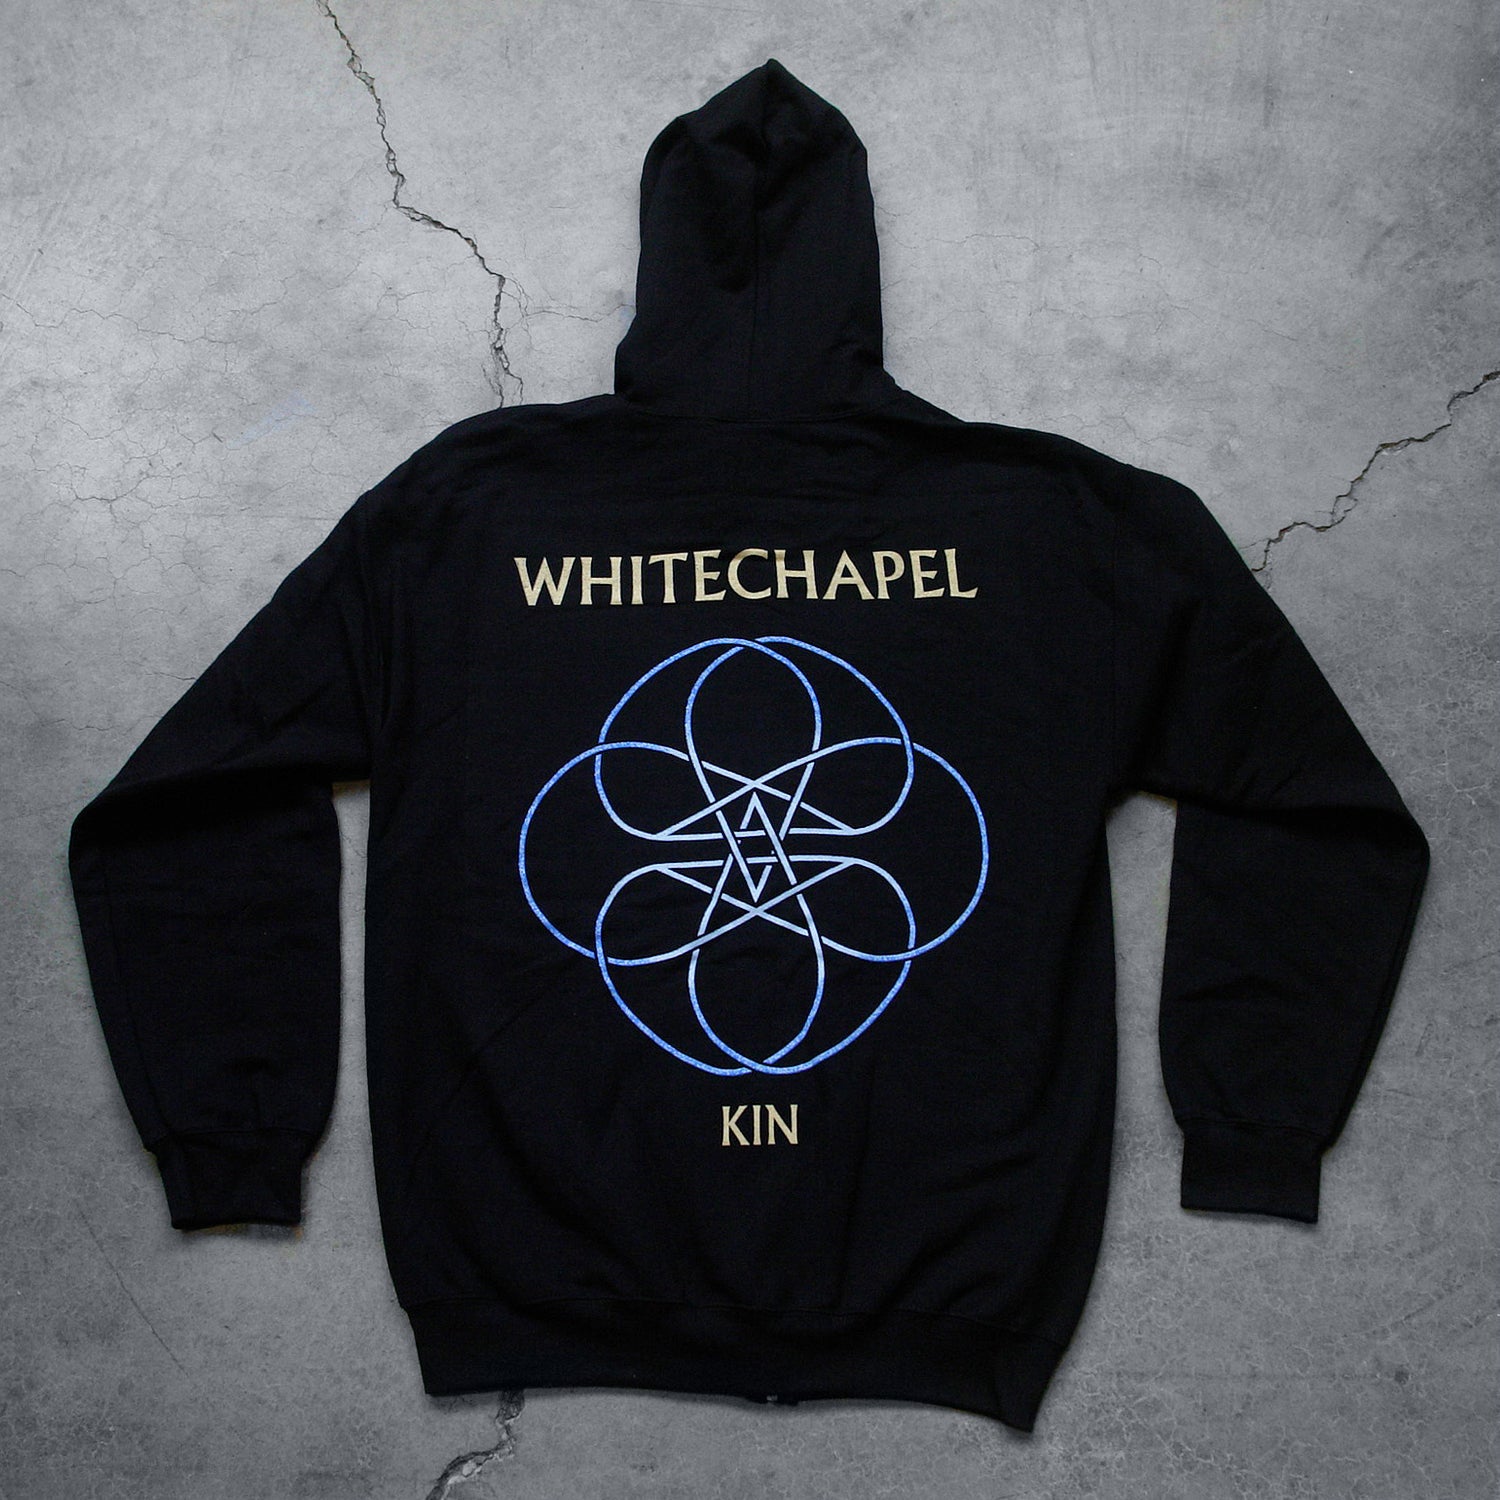 Image of the back of a black zip up sweatshirt against a grey concrete background. Across the shoulder area in white text reads "whitechapel". Below this is a circular lined abstract design with two stars in the center, designed to look like a double pentagram. This is white and blue. Below this design in white text reads "Kin".